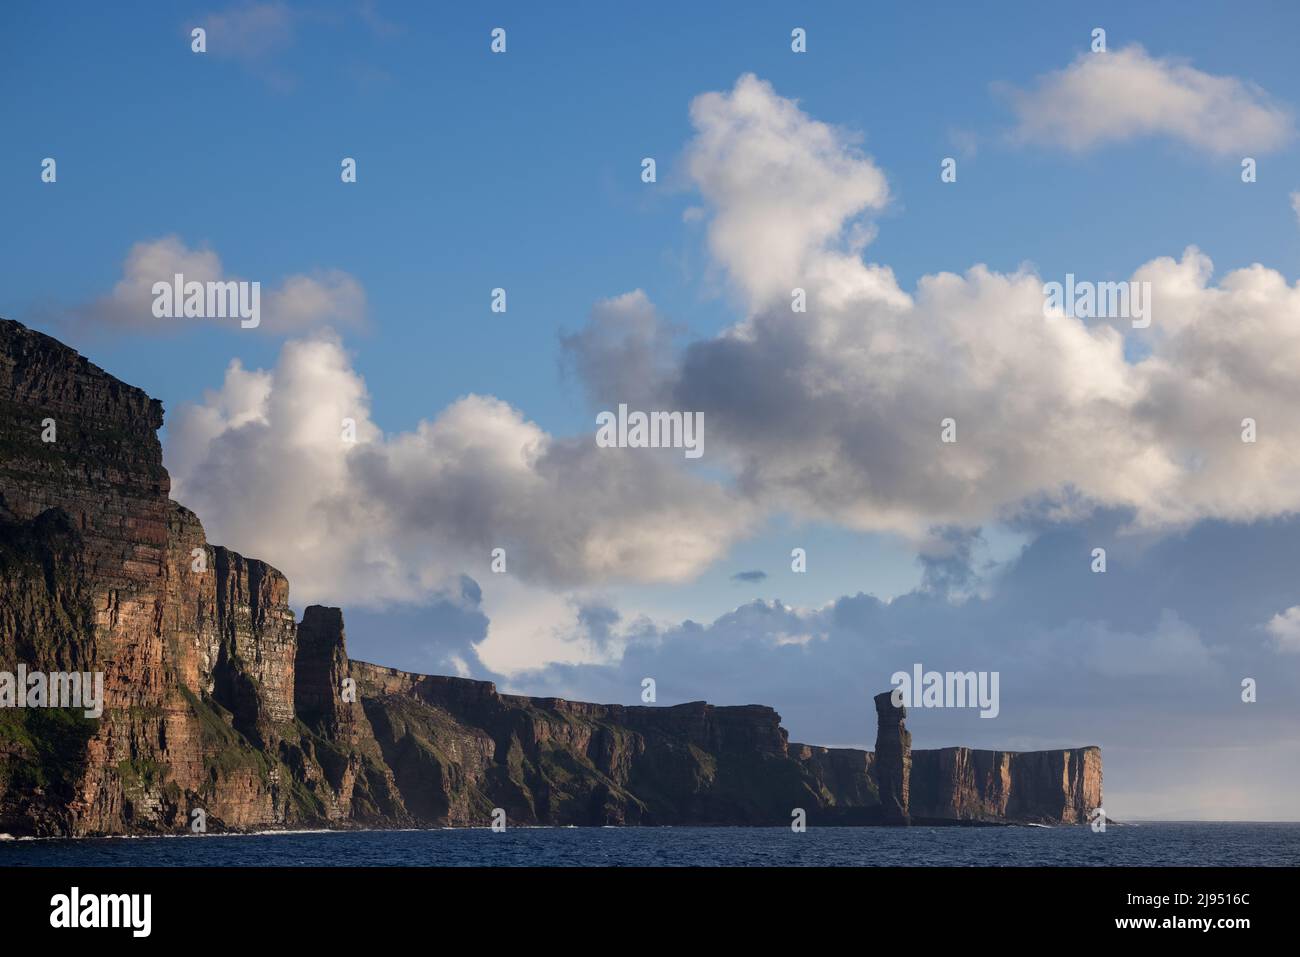 The Old Man of Hoy, Orkney Isles, Écosse, Royaume-Uni Banque D'Images